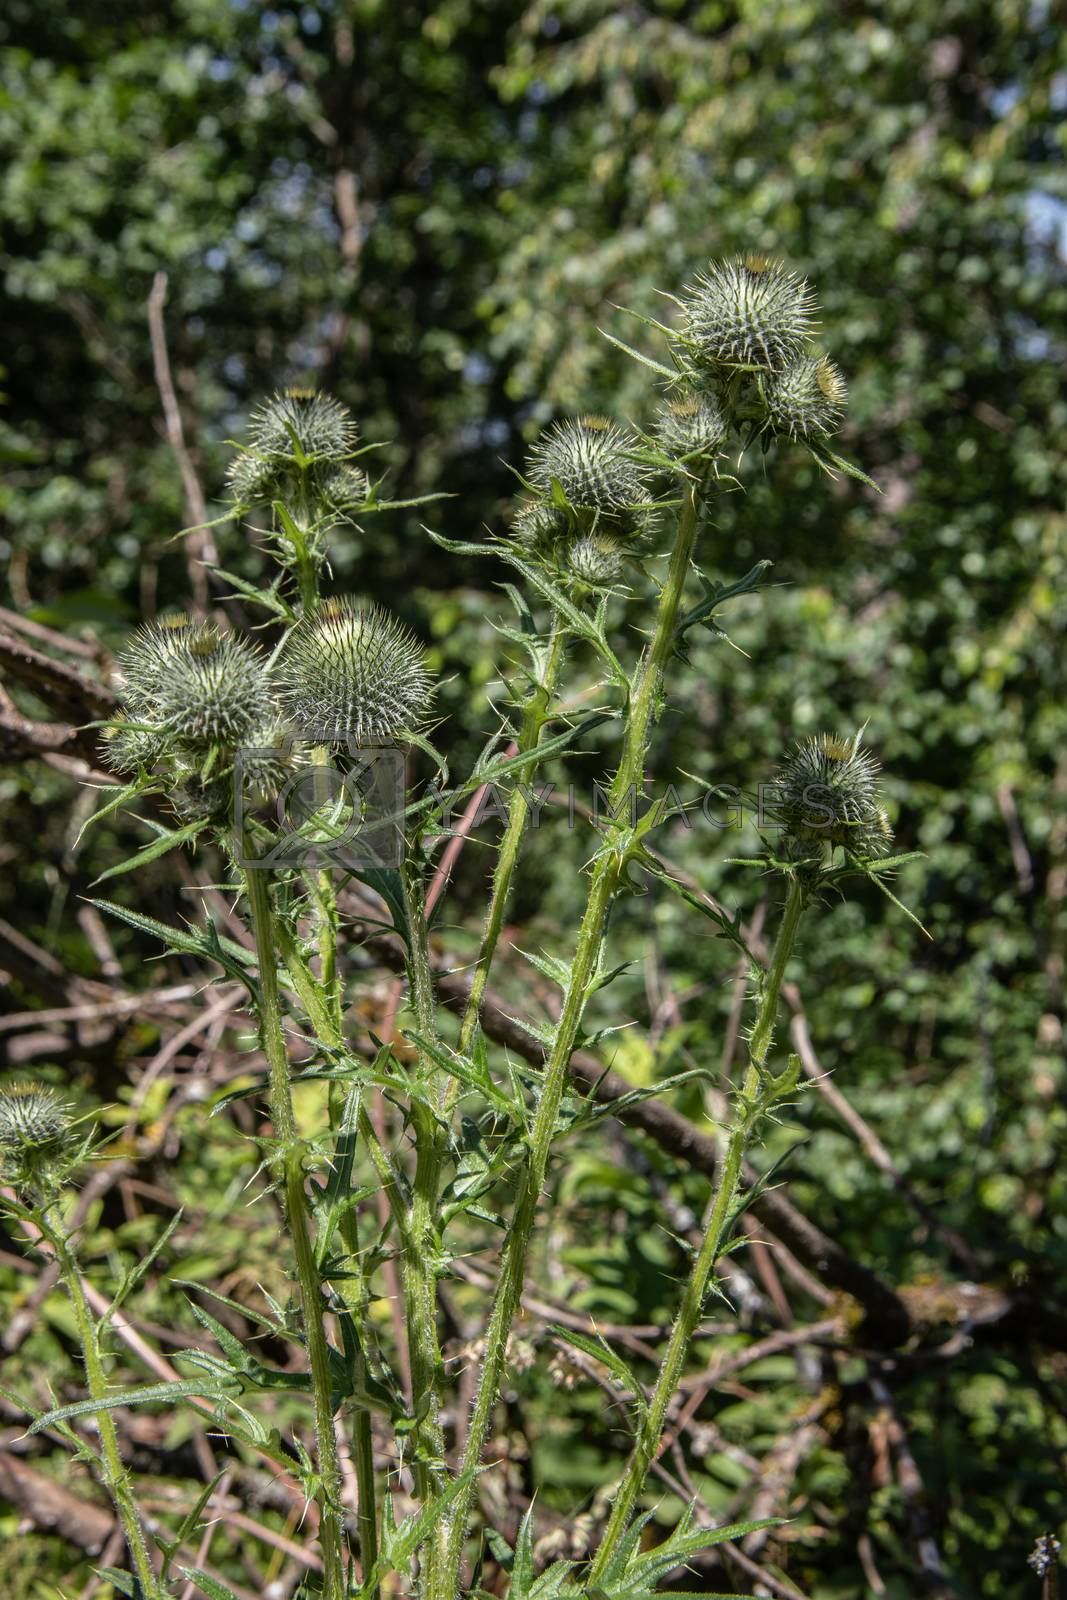 Royalty free image of Globe thistles with buds and spiky leaves by Dr-Lange